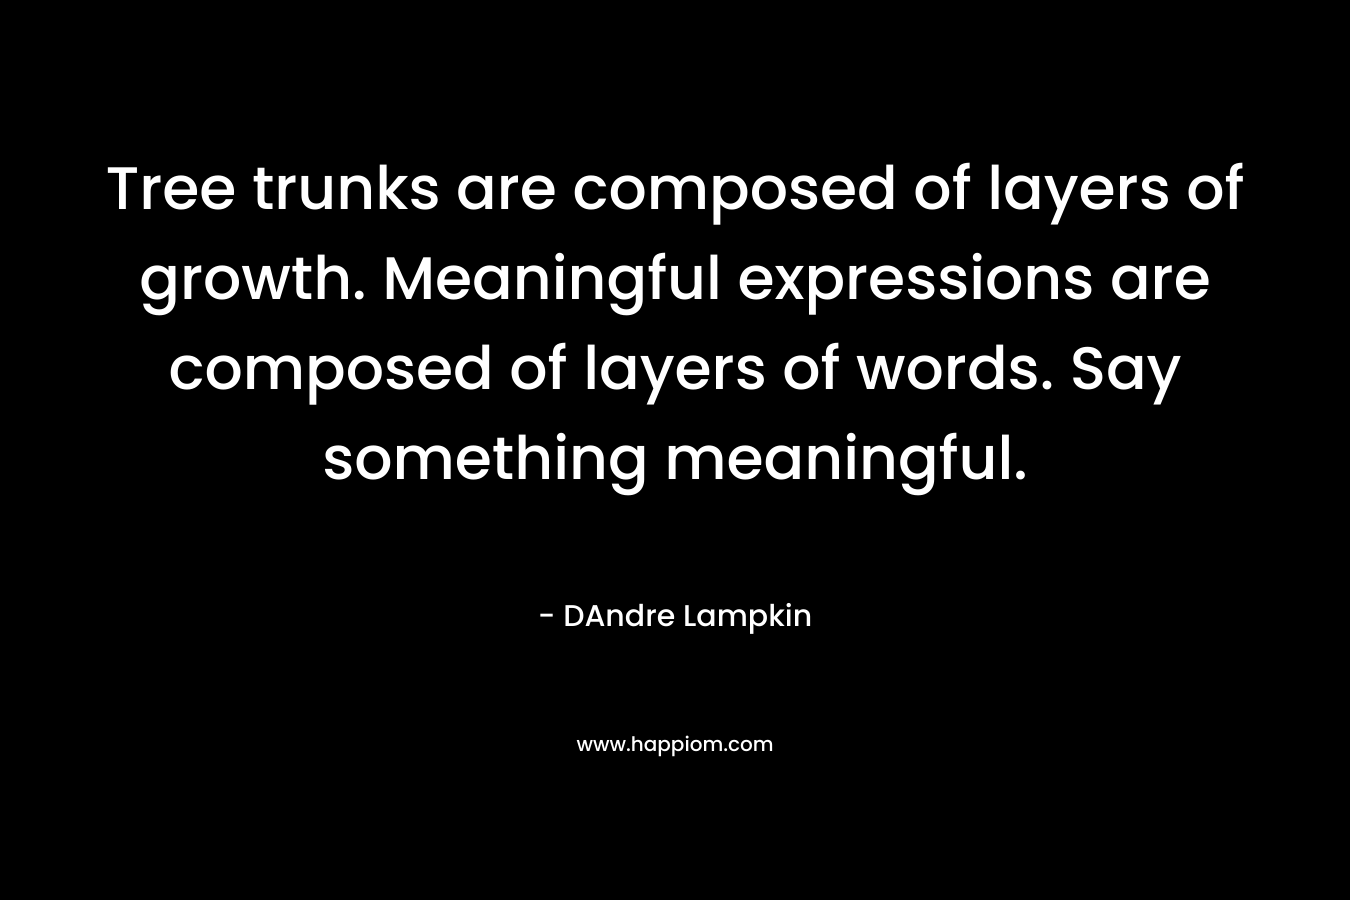 Tree trunks are composed of layers of growth. Meaningful expressions are composed of layers of words. Say something meaningful.